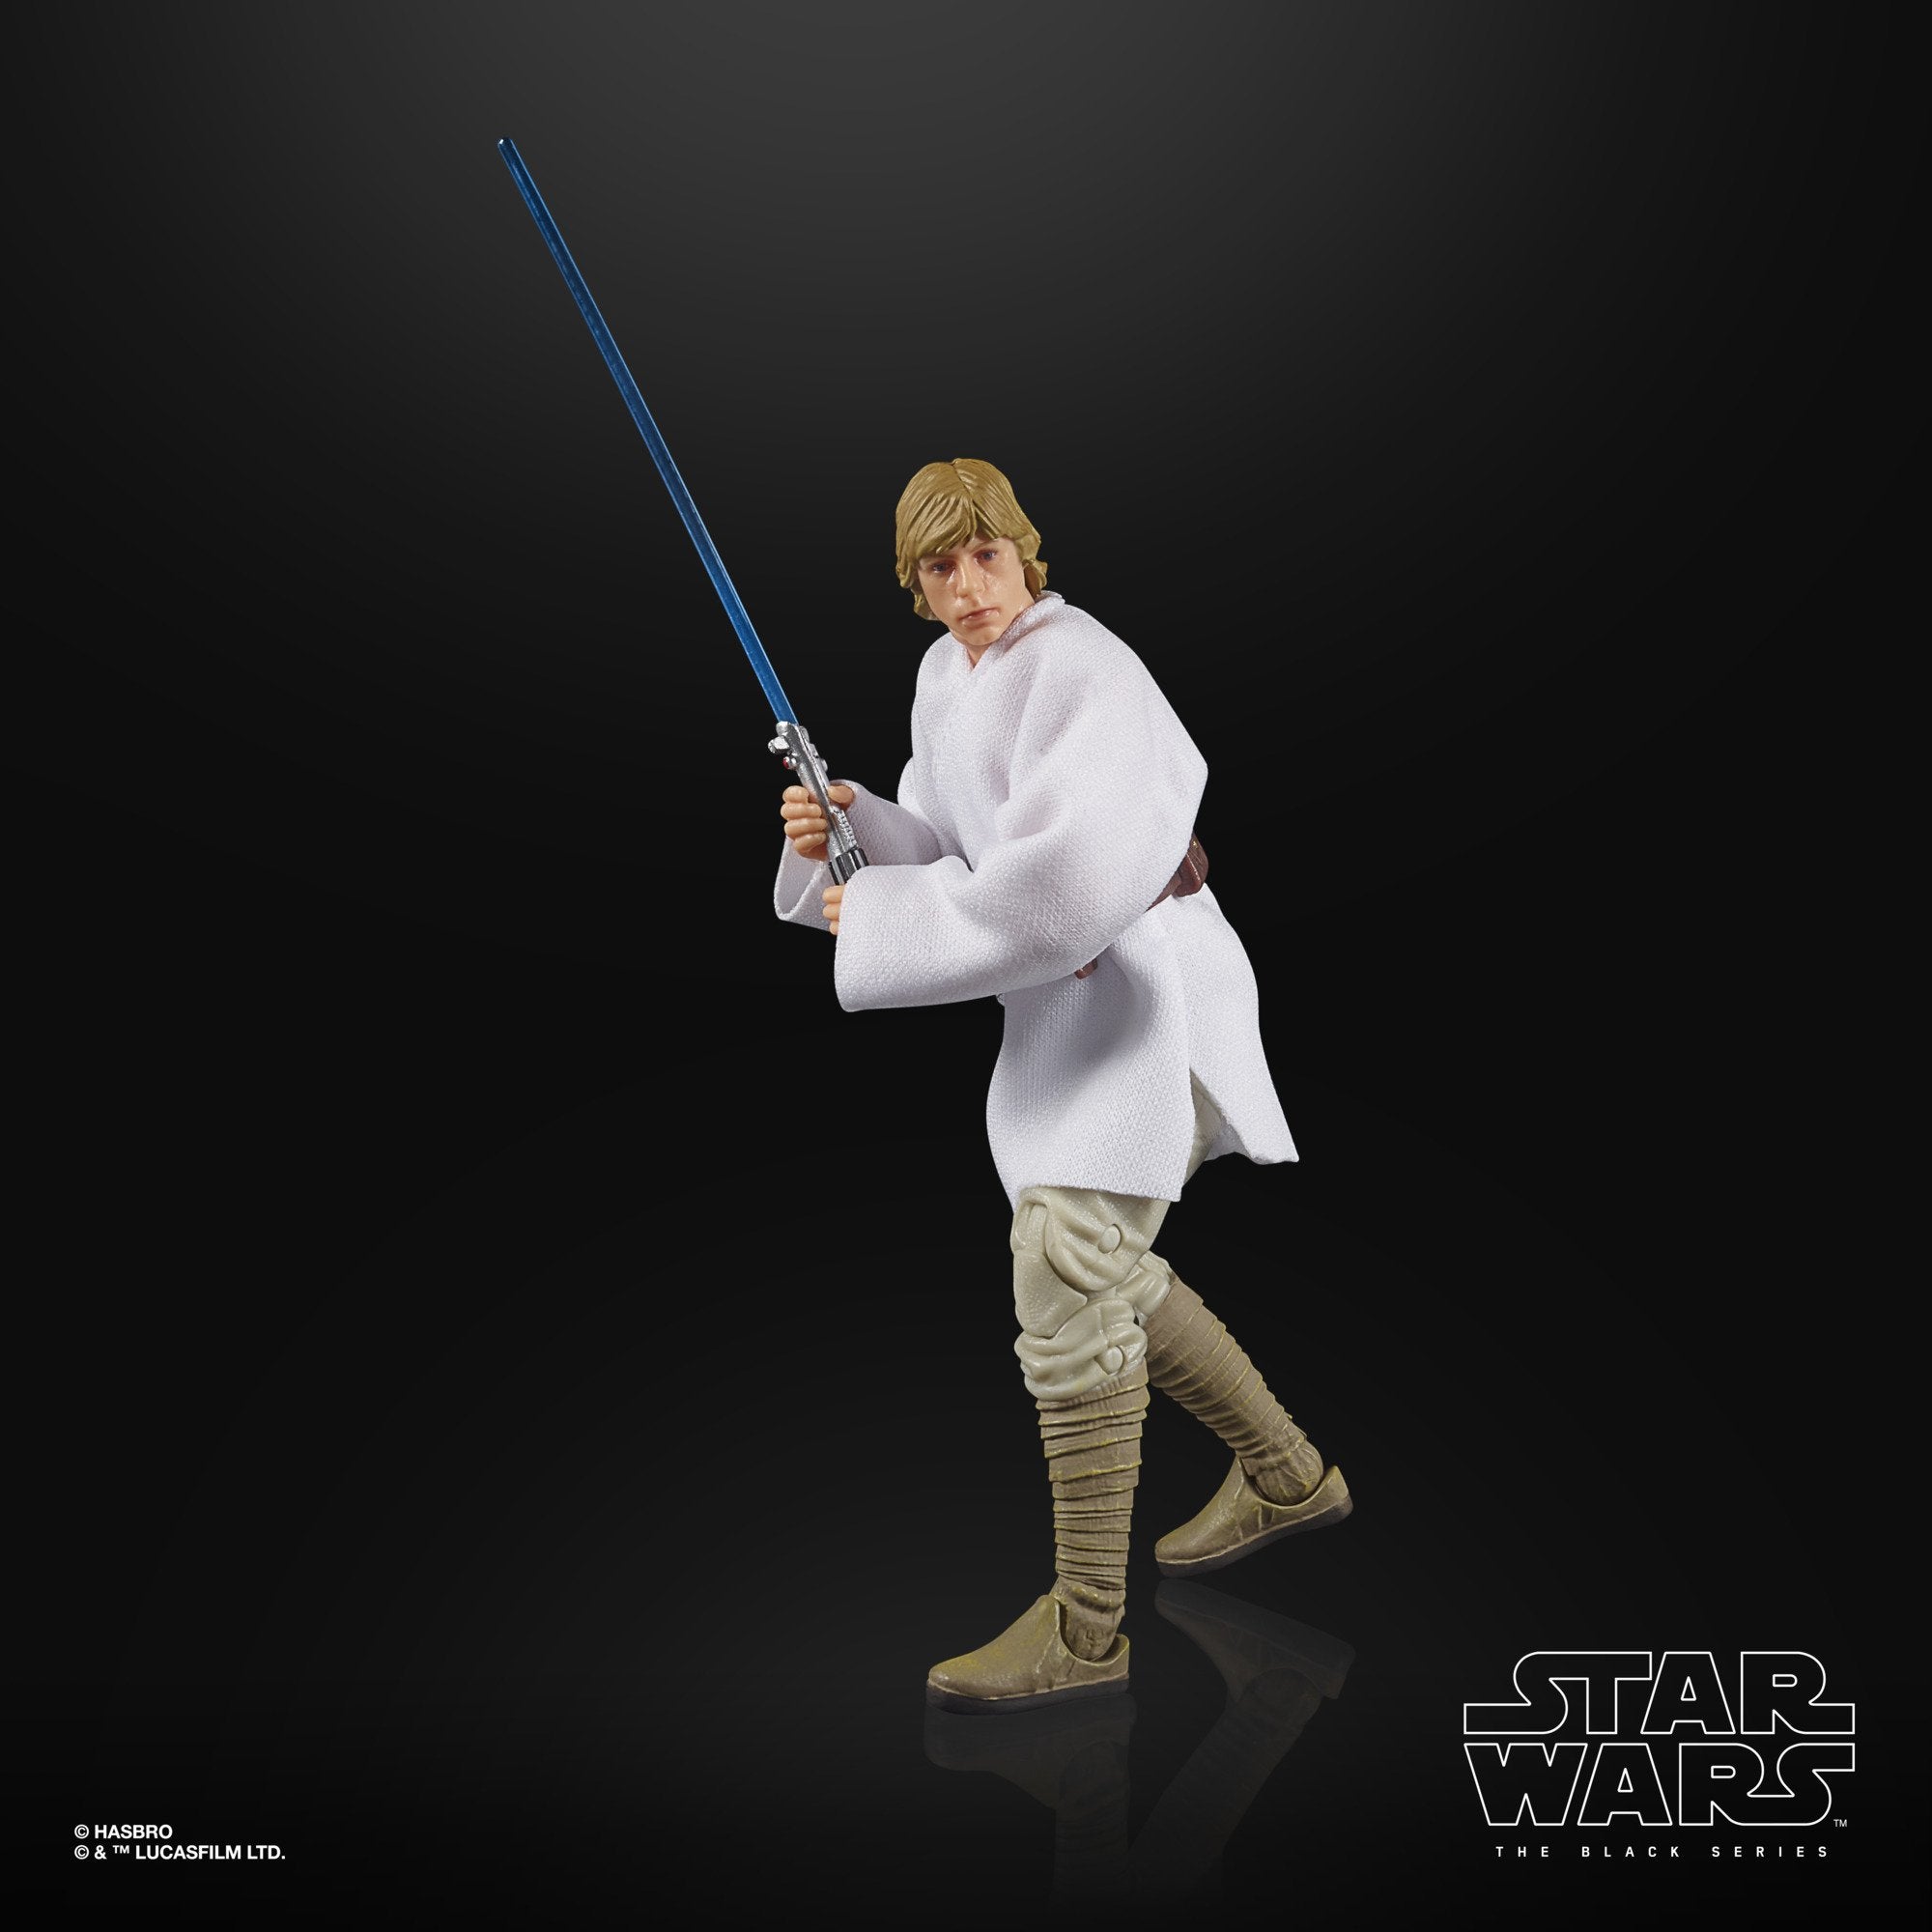 Hasbro Star Wars The Black Series Lucasfilm 50th Anniversary The Power of the Force Luke Skywalker 6 Inch Action Figure